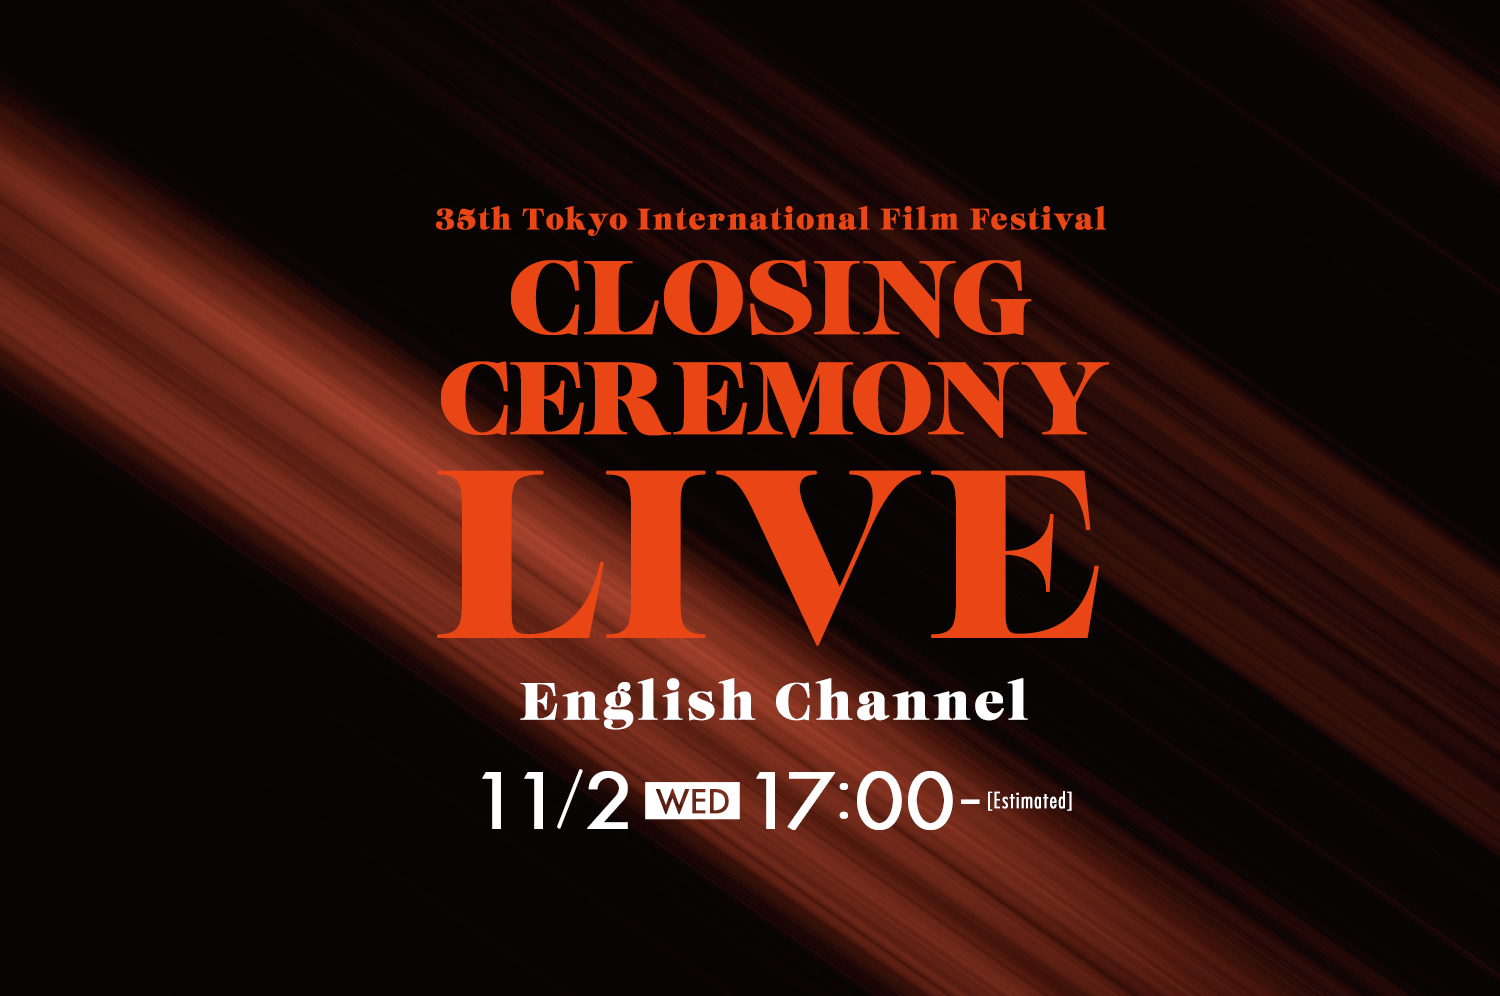 CLOSING CEREMONY LIVE English Channel 11/2 [WED] 17:00-(Estimated)